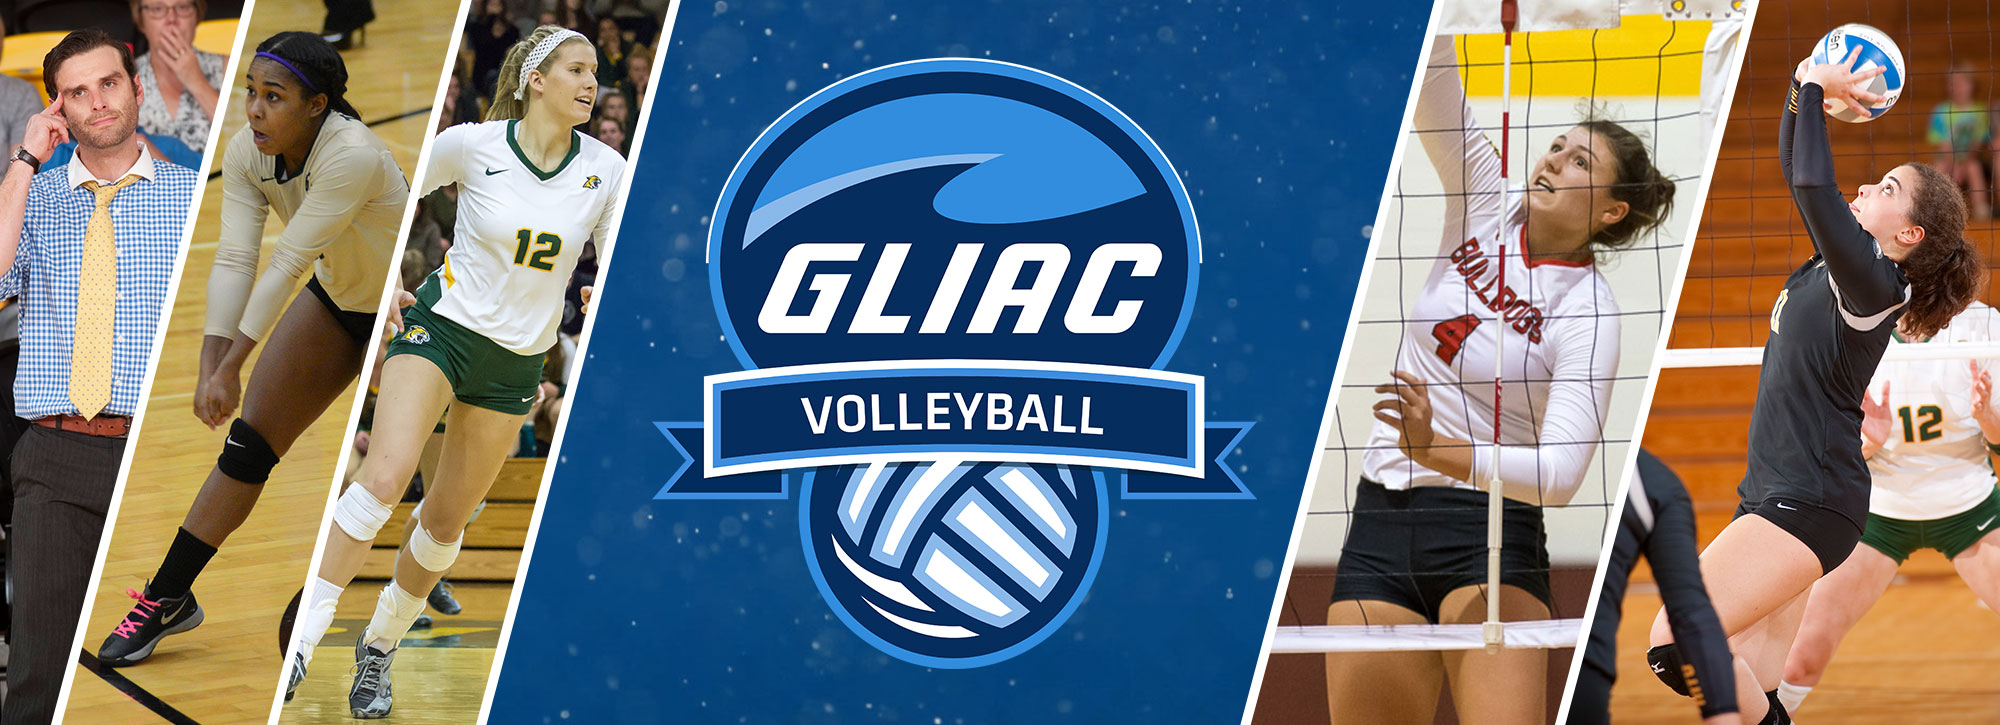 2017 All-GLIAC Volleyball Awards Unveiled